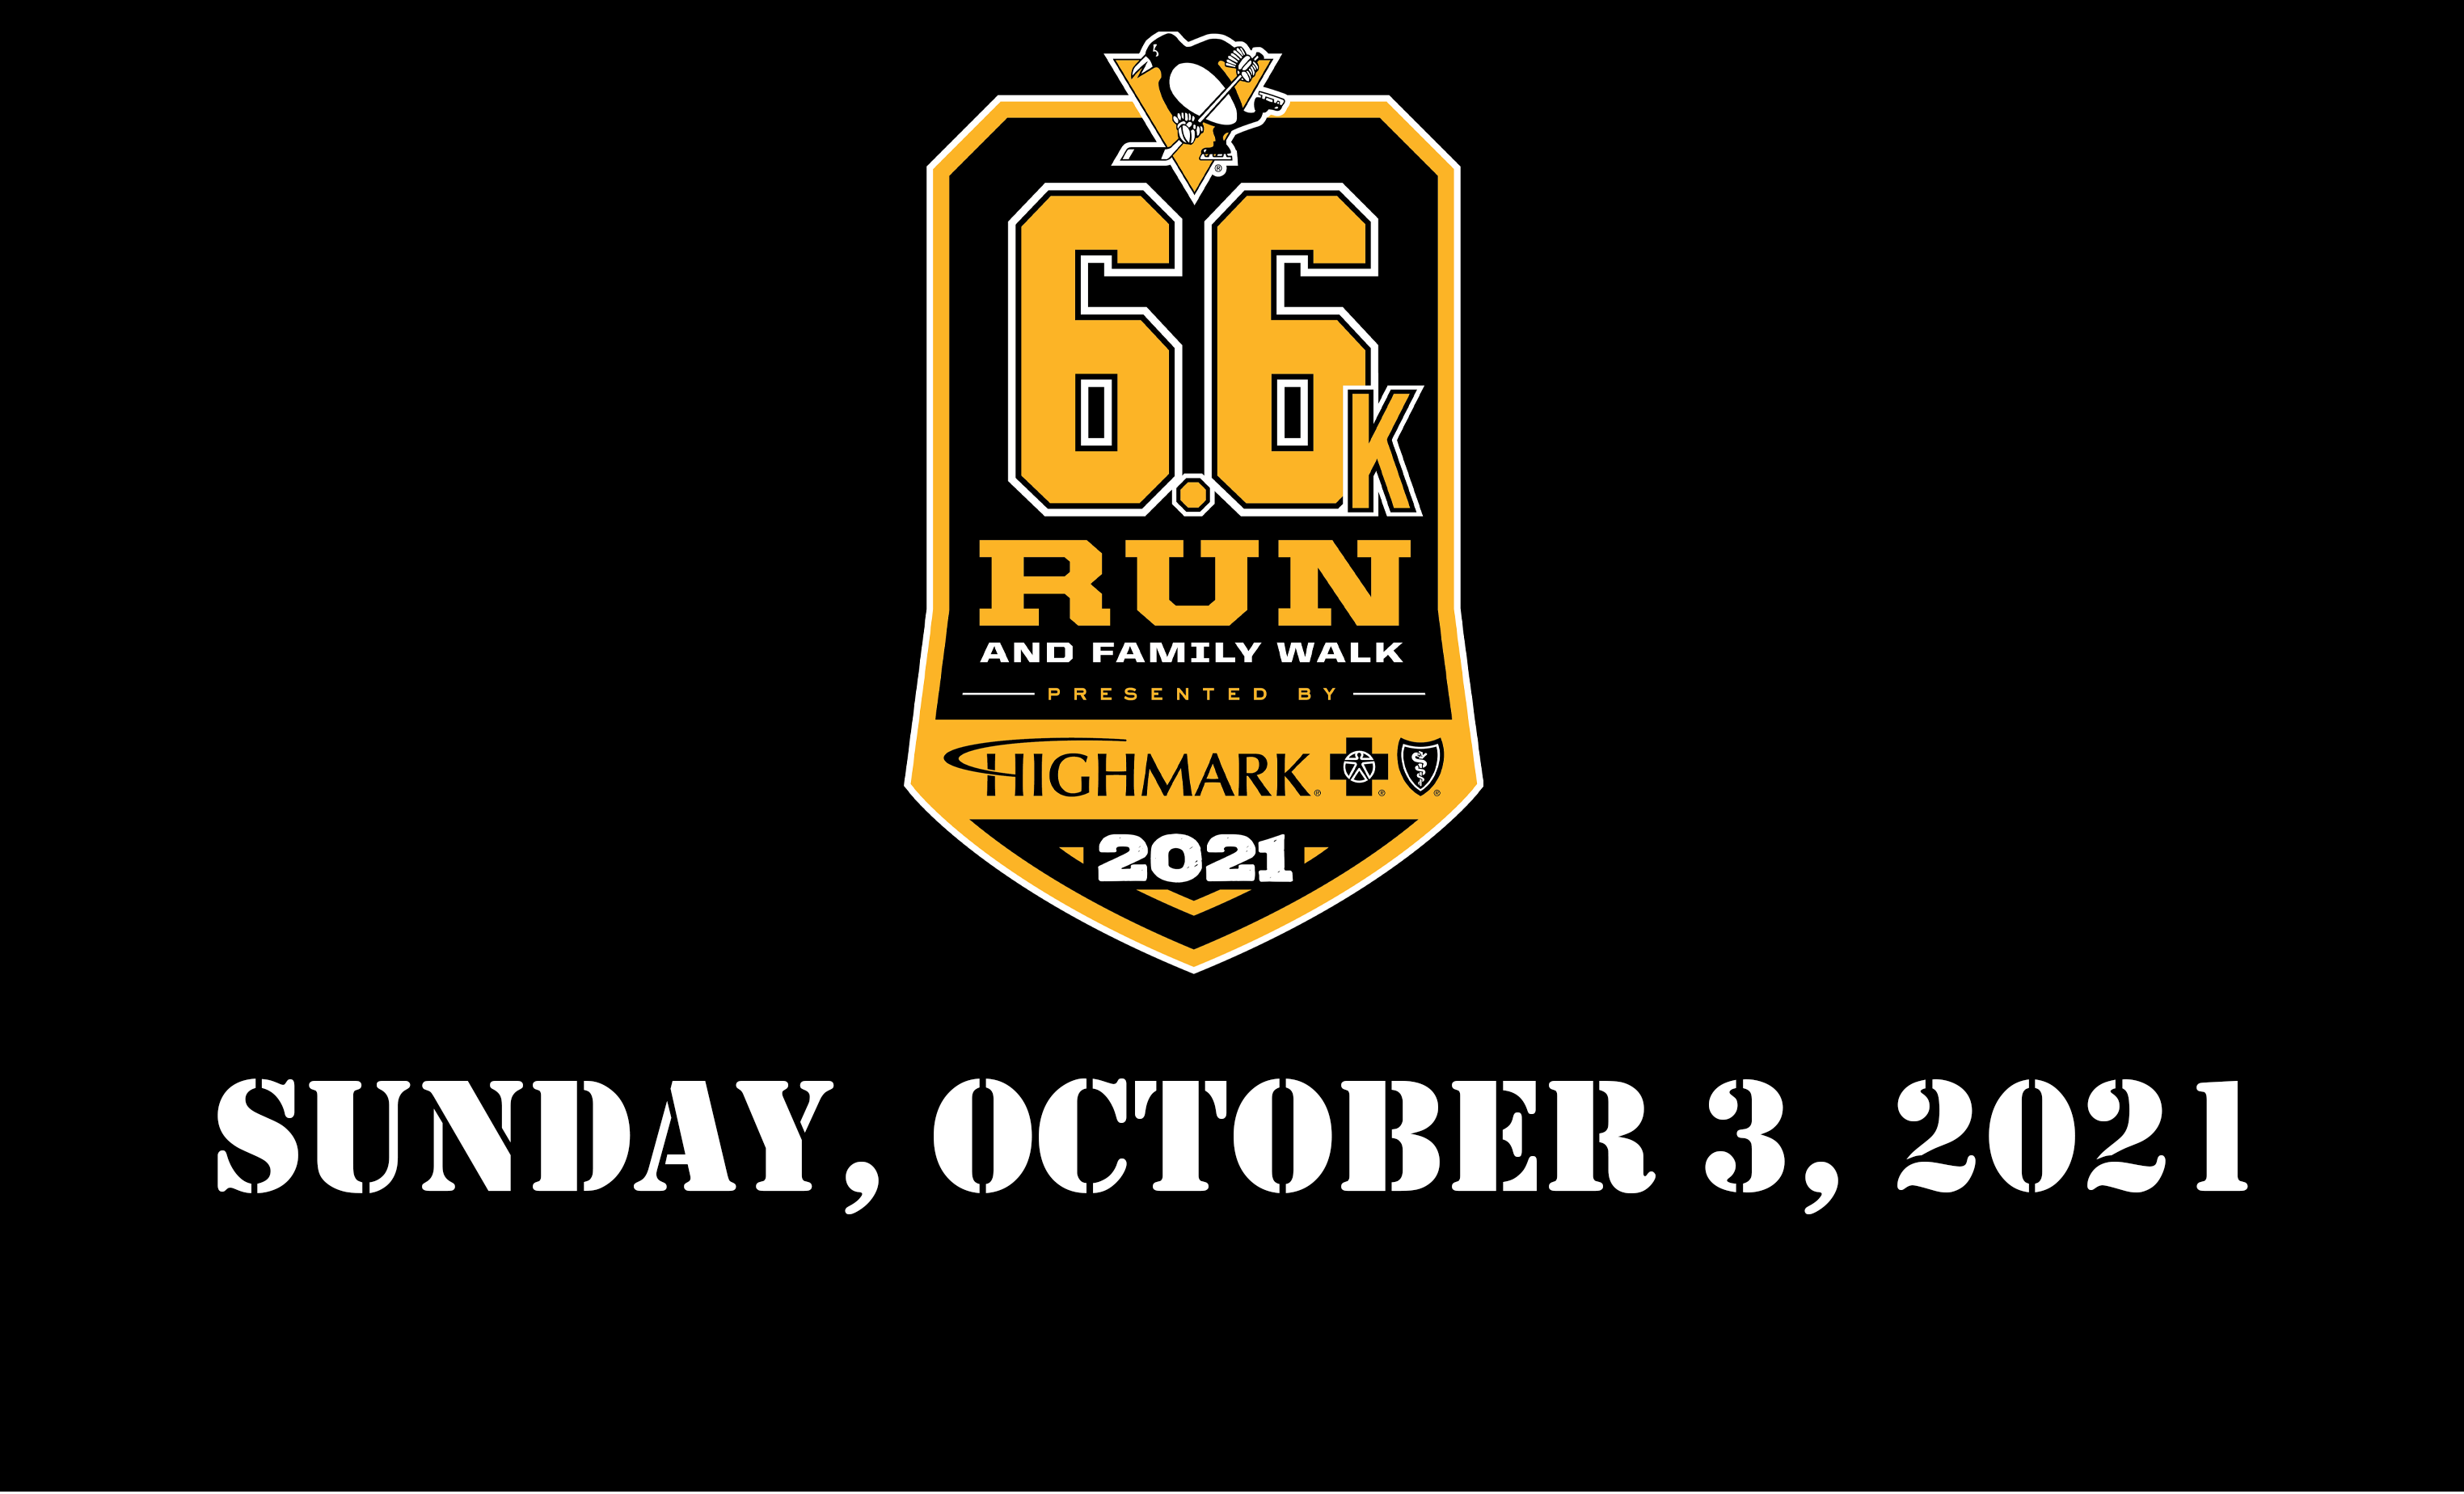 Penguins 6.6K Run and Family Walk Presented by Highmark Returns to the ‘Burgh